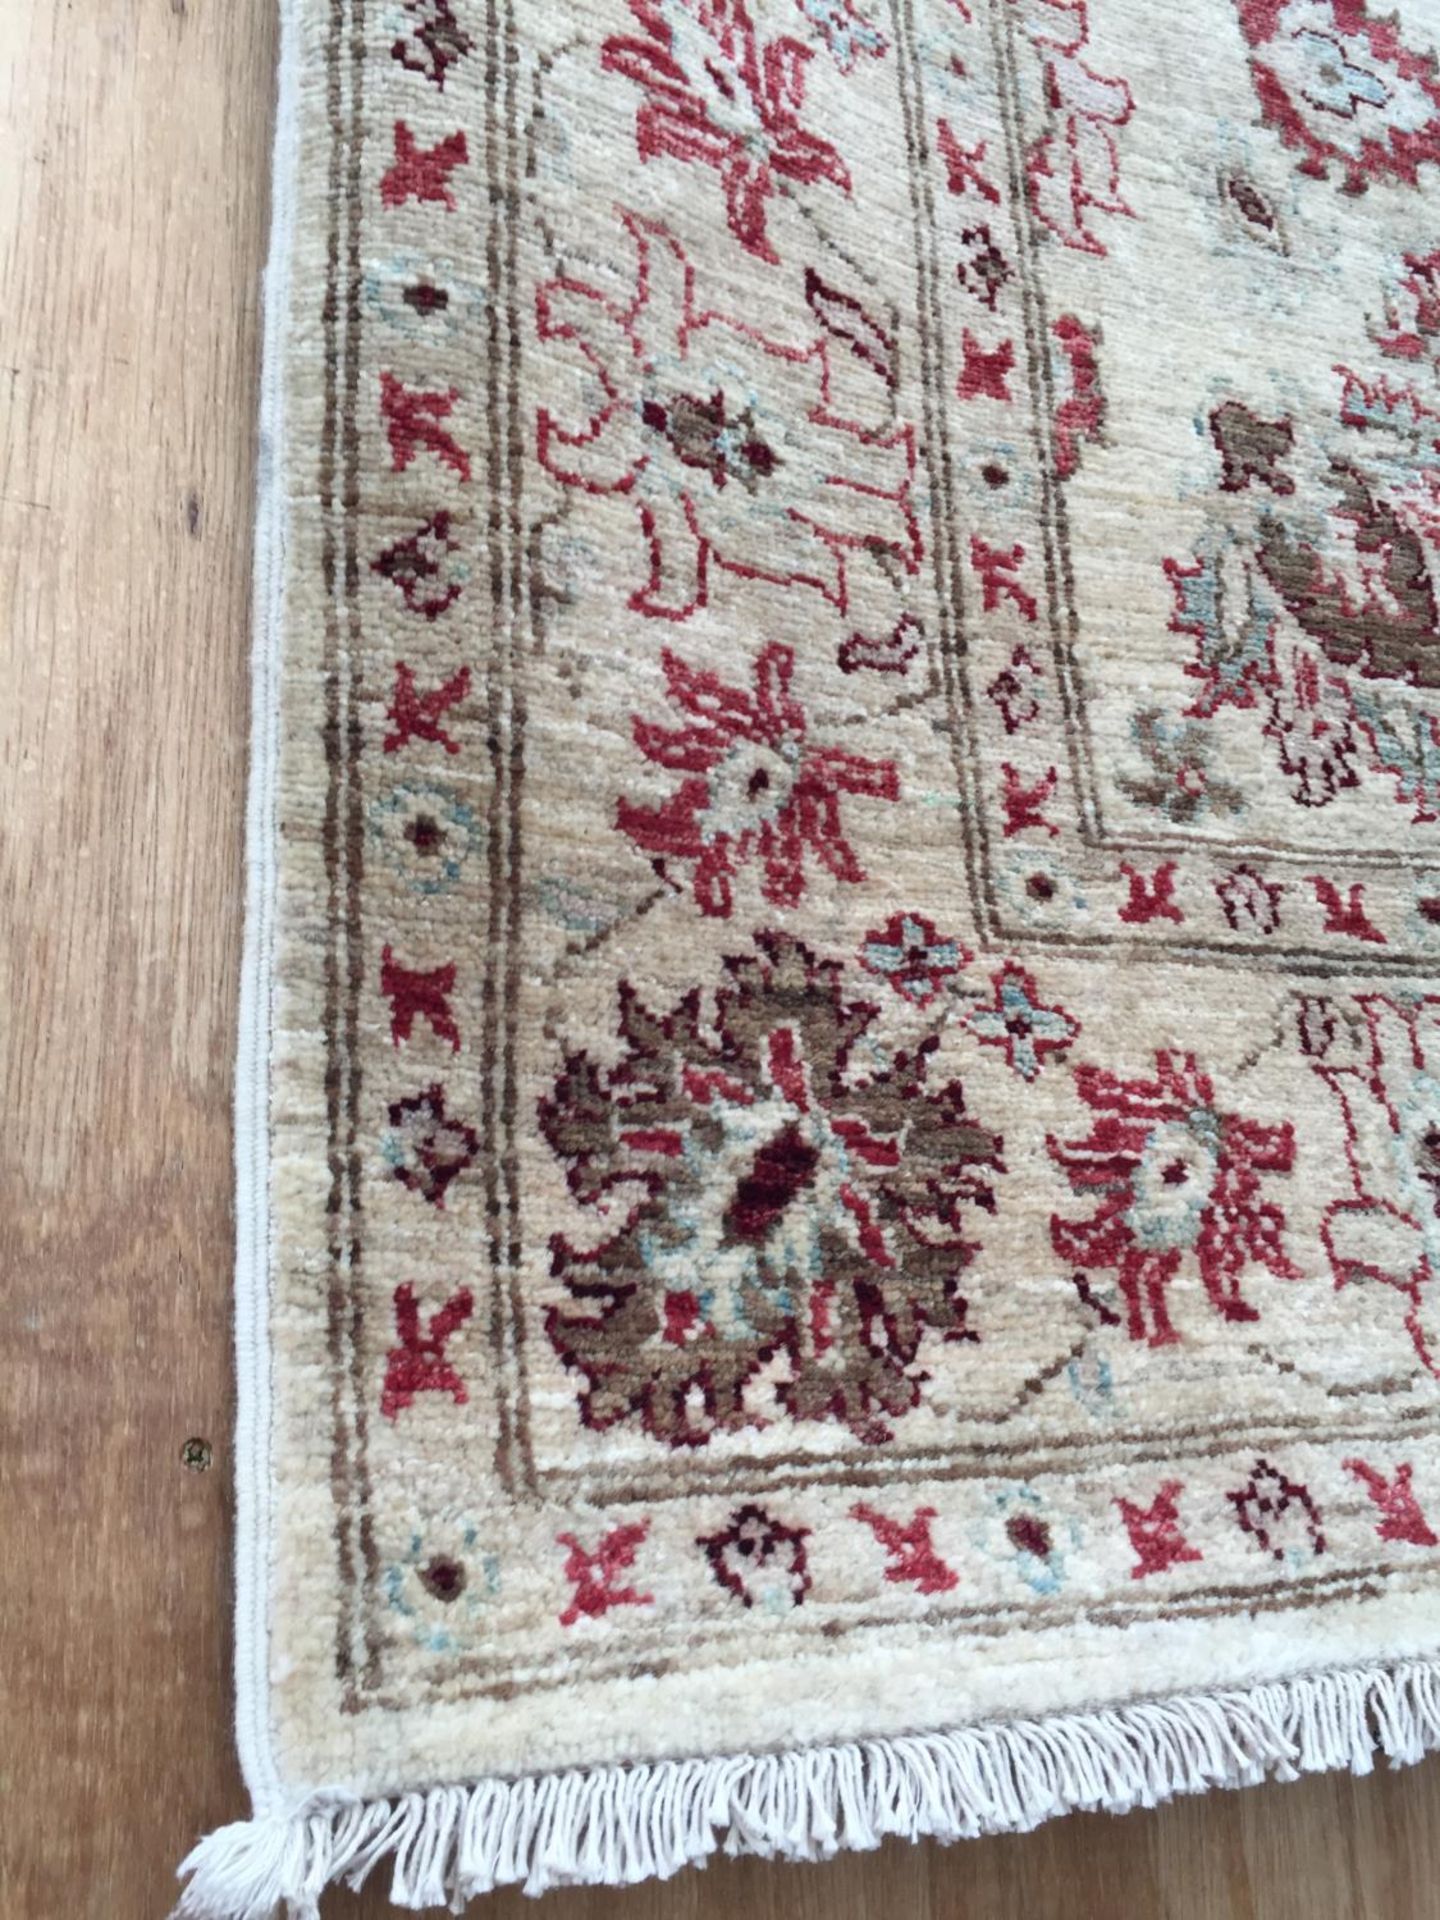 A HAND KNOTTED 100% WOOL PAKISTAN RUG 176CM X 125CM - Image 2 of 2